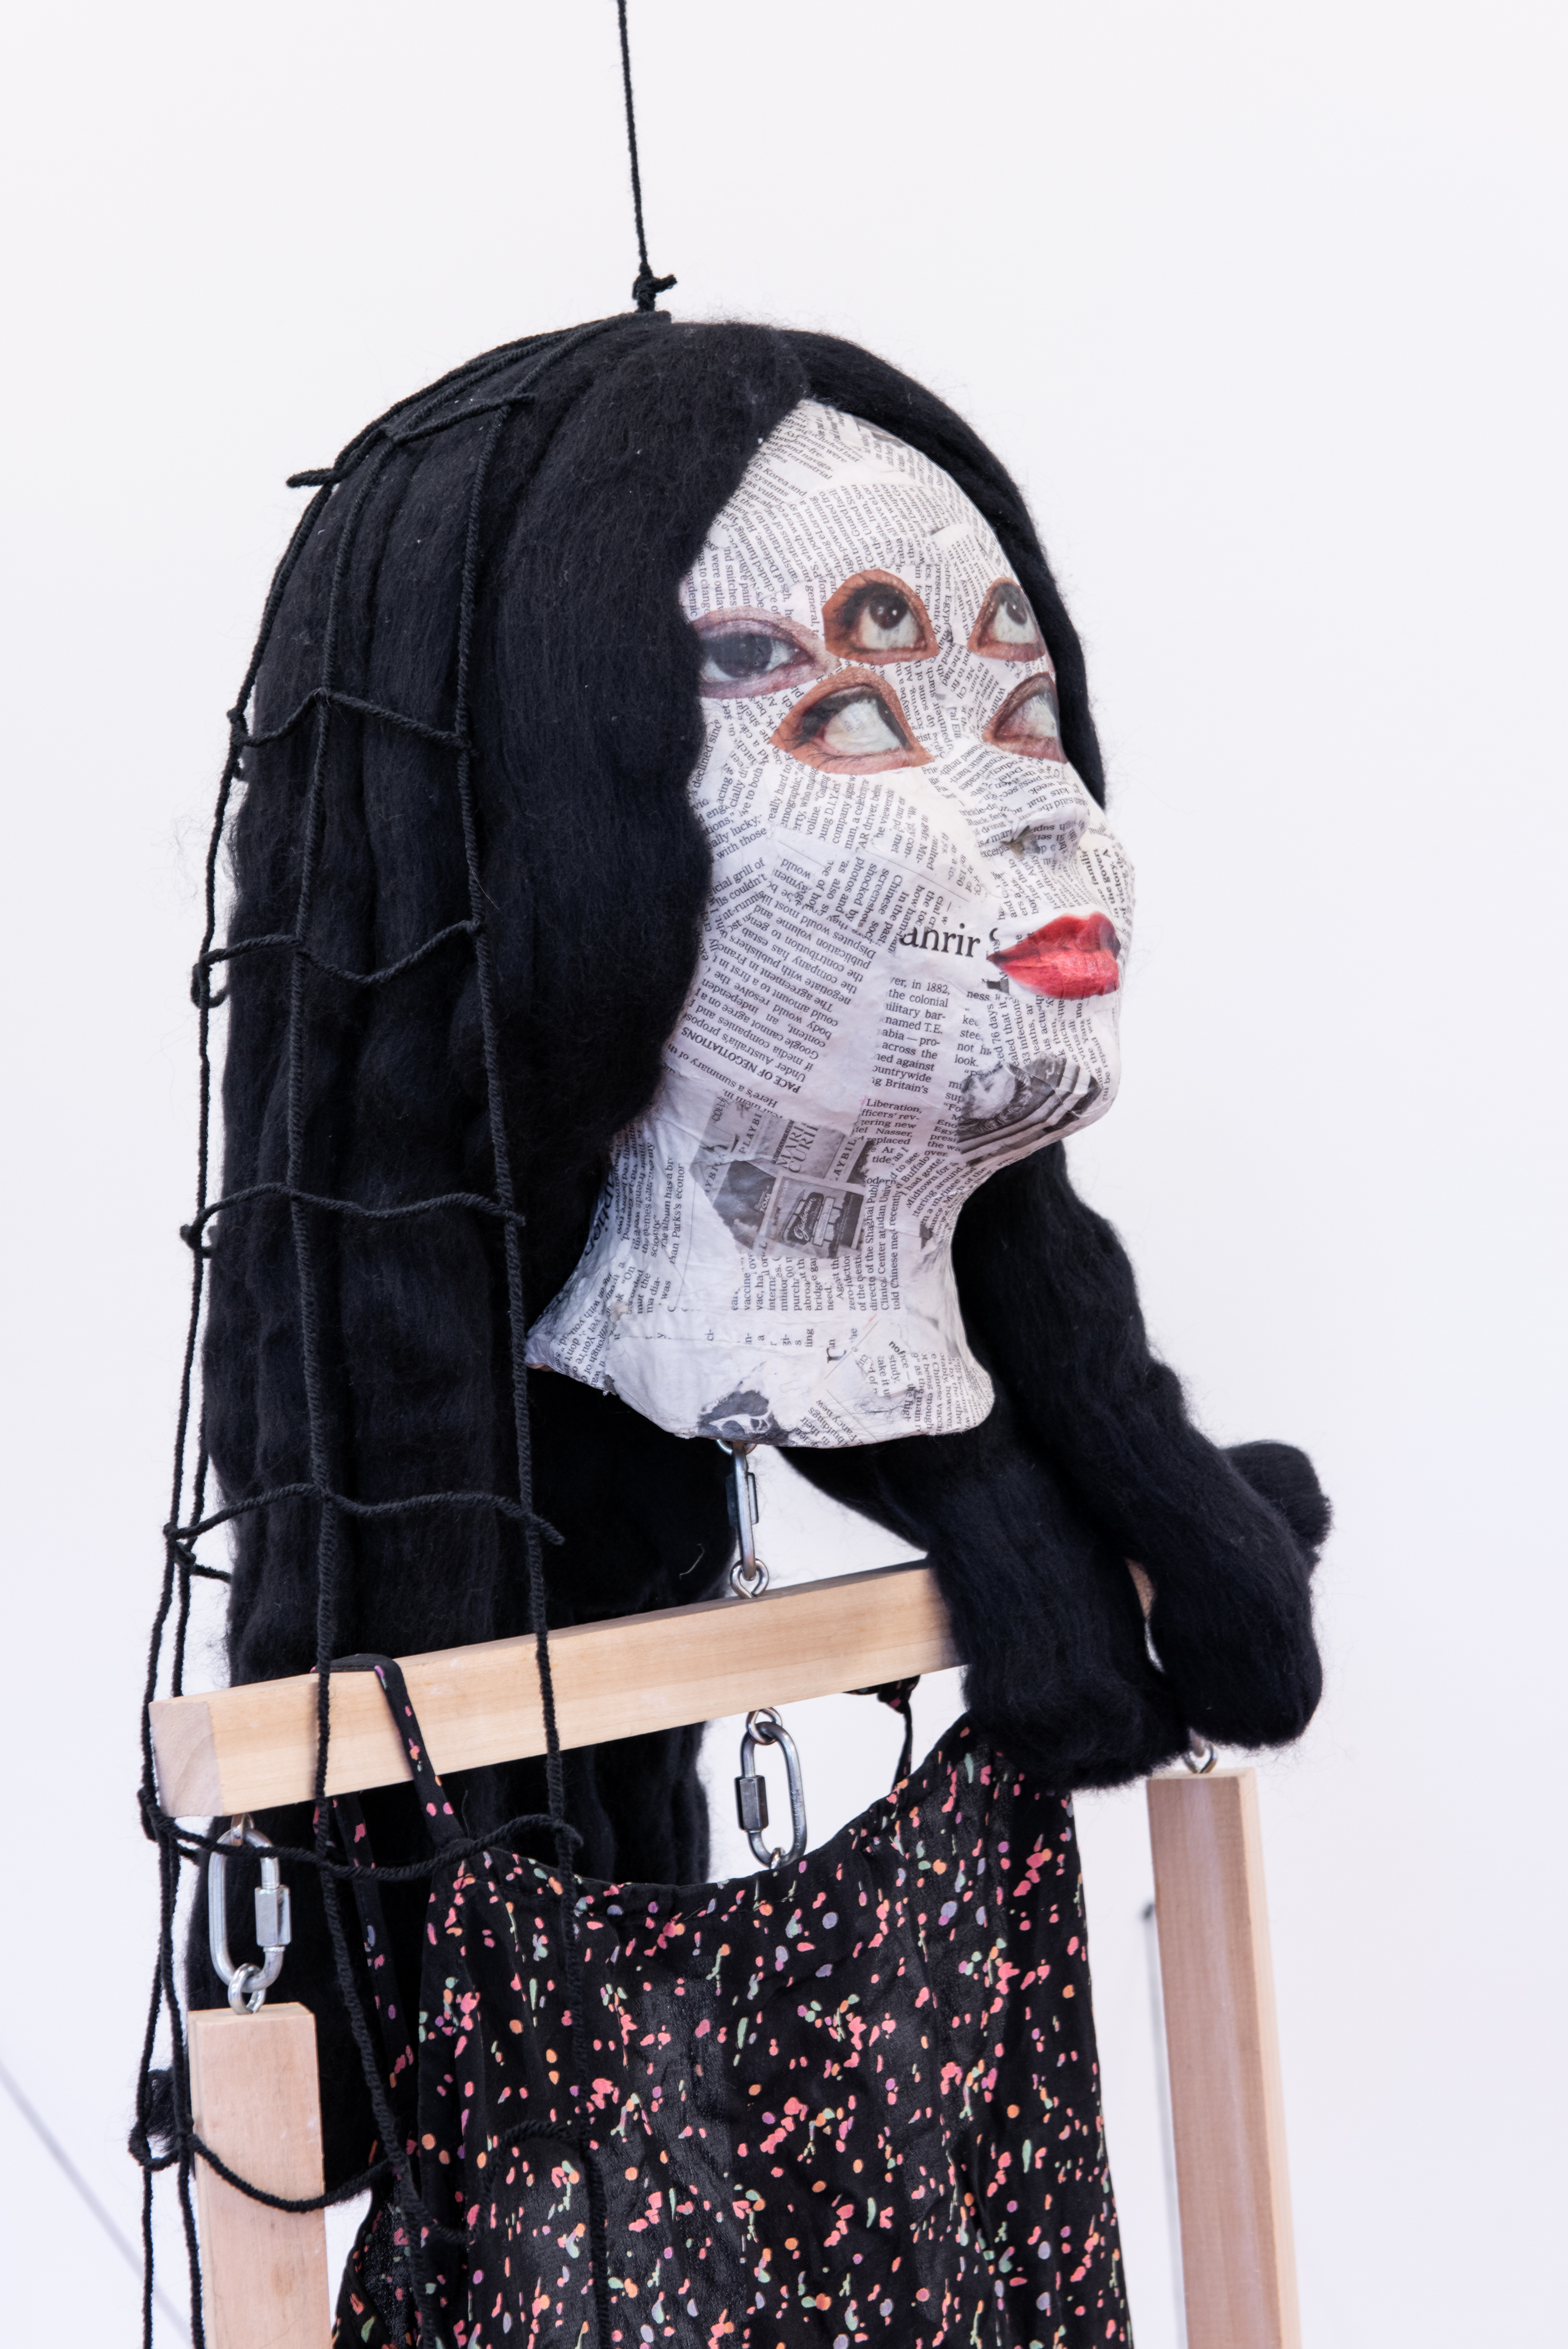 Spider Ladies (Maggie II), 2015Papier mâché, clothes, wool strings, wood / Courtesy the artist